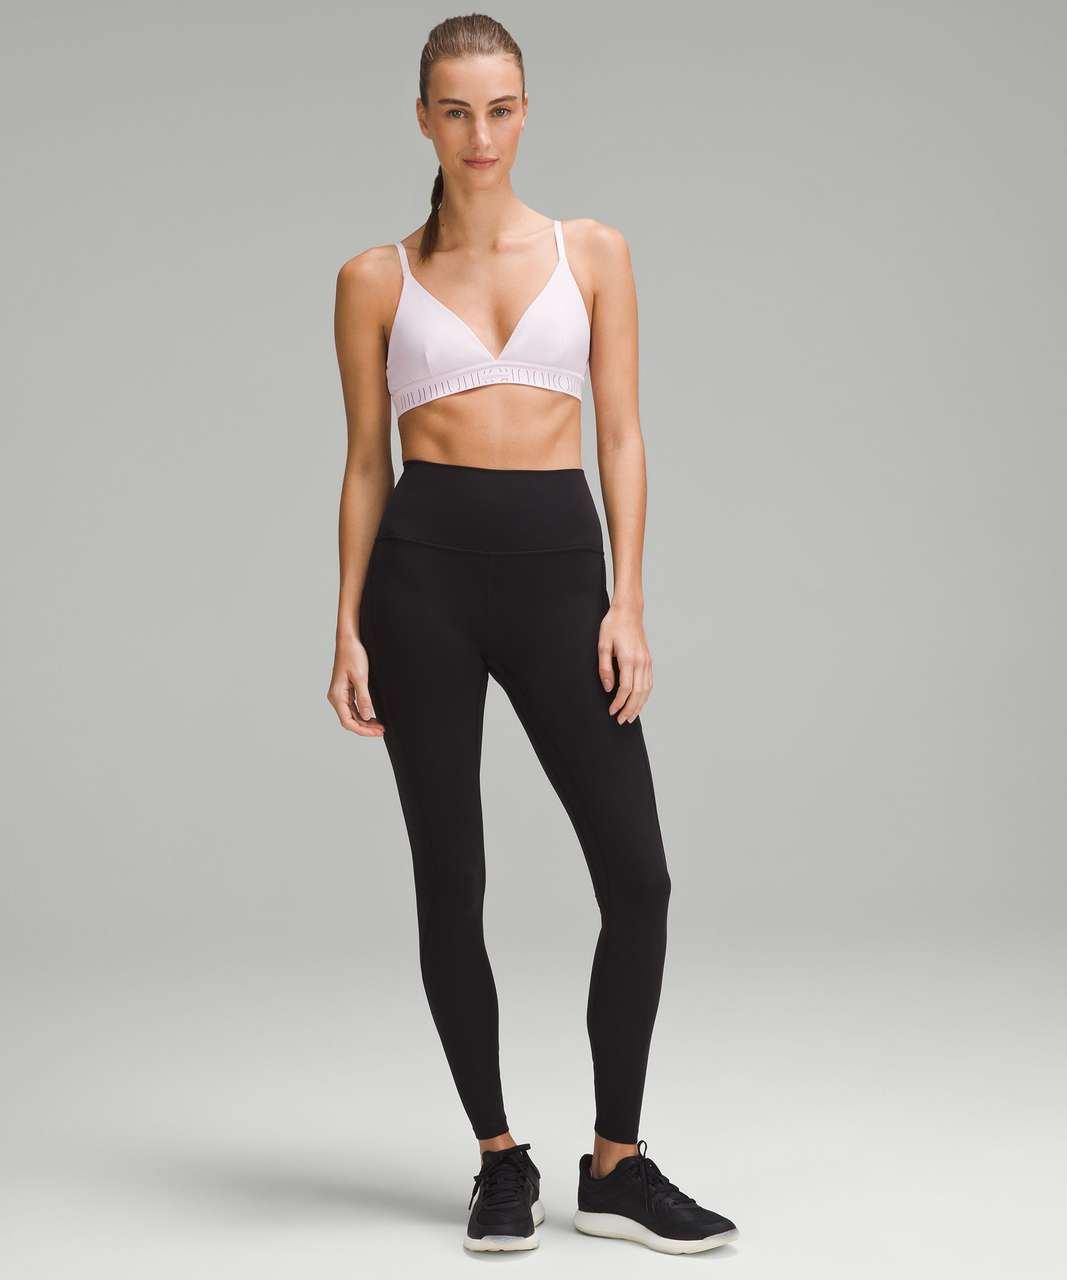 Lululemon License to Train Triangle Bra Light Support, A/B Cup